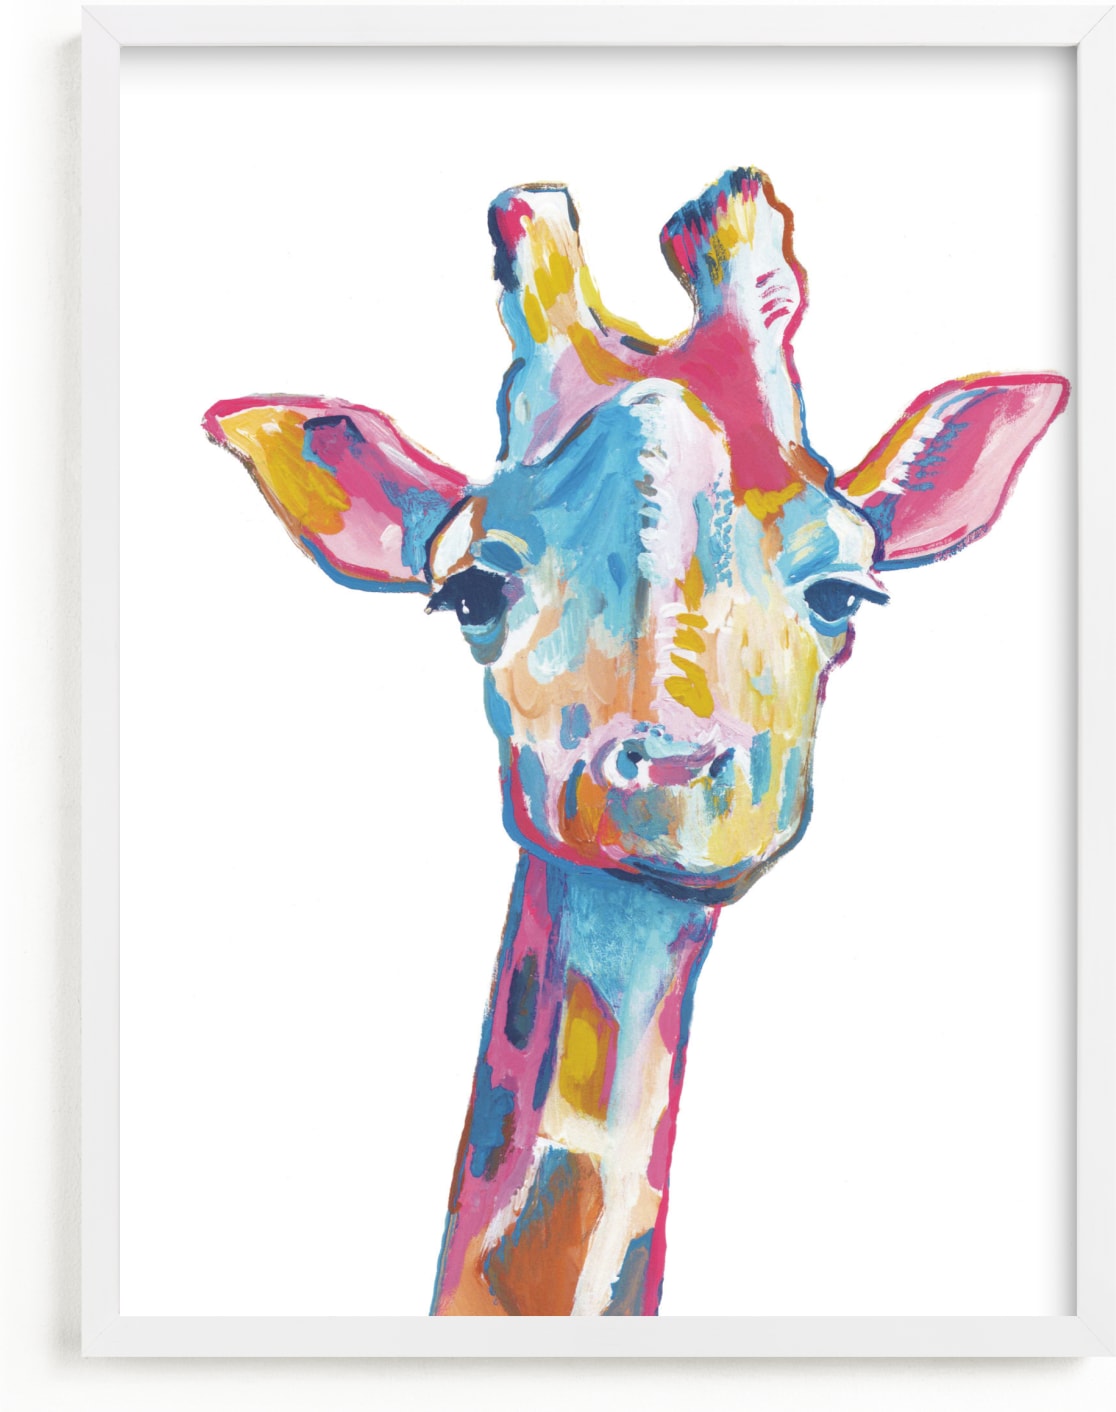 This is a colorful art by Makewells called Mr. Giraffe.